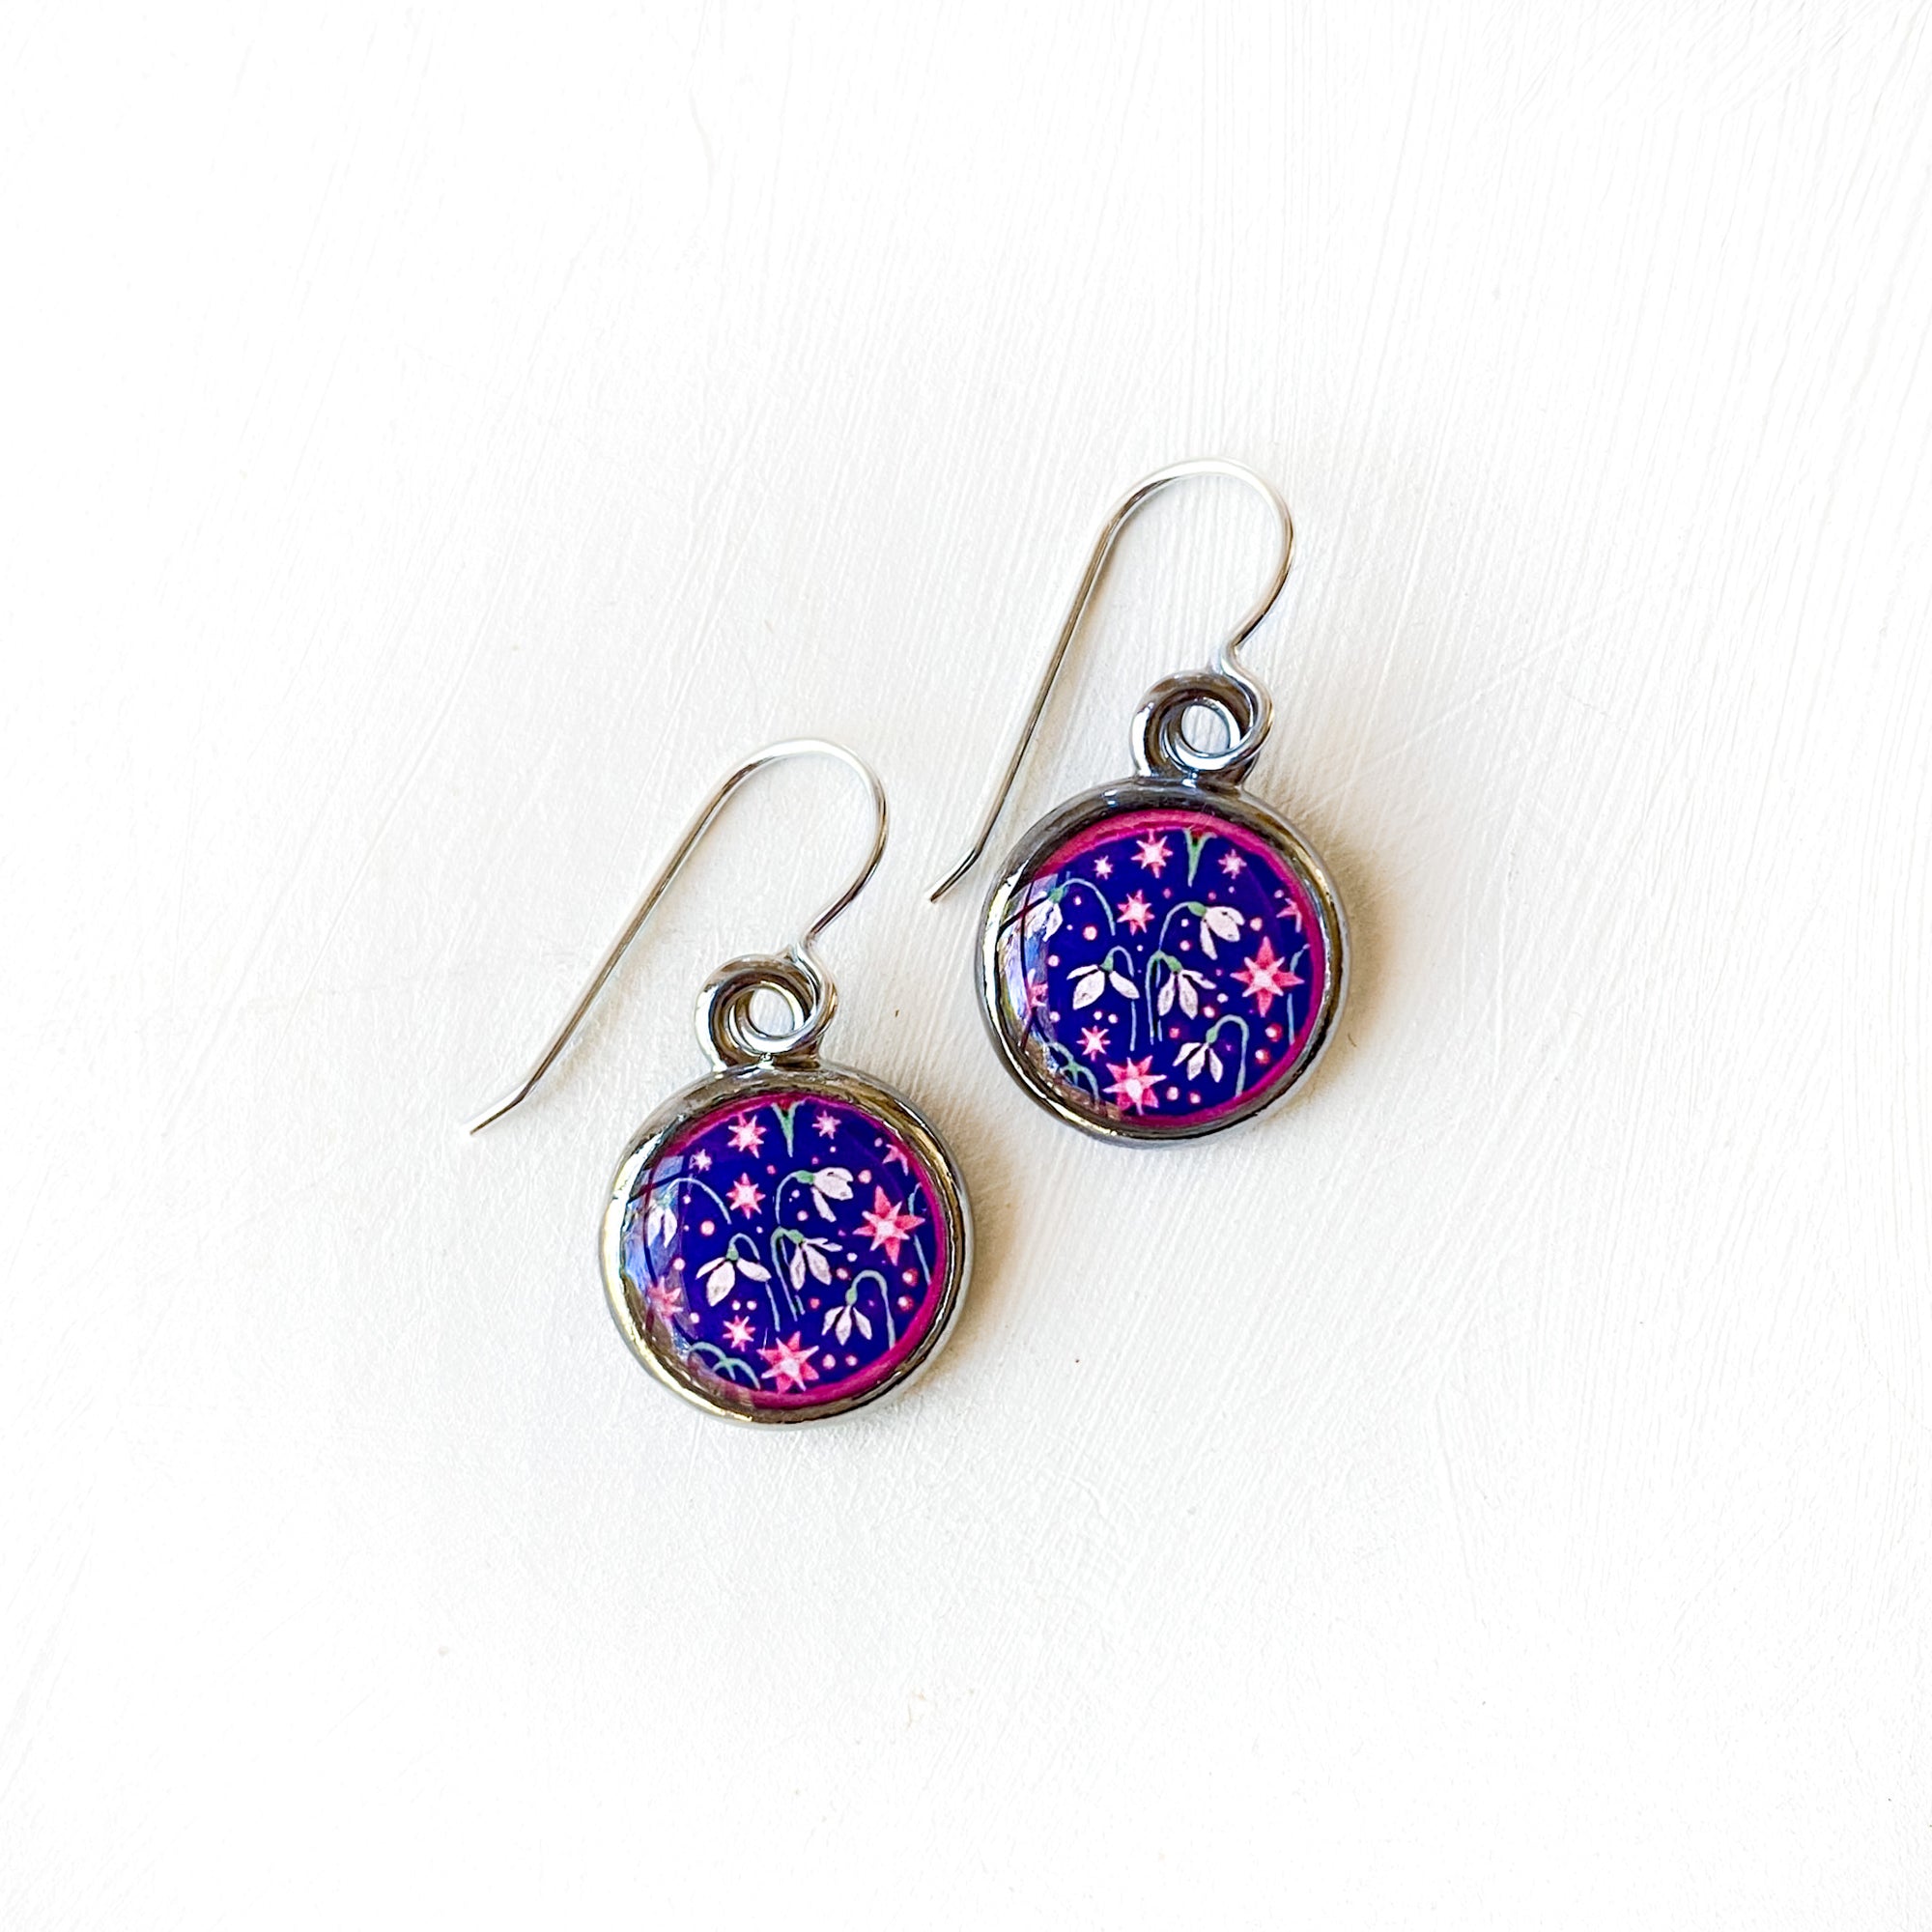 a pair of earrings sitting on top of a wooden board